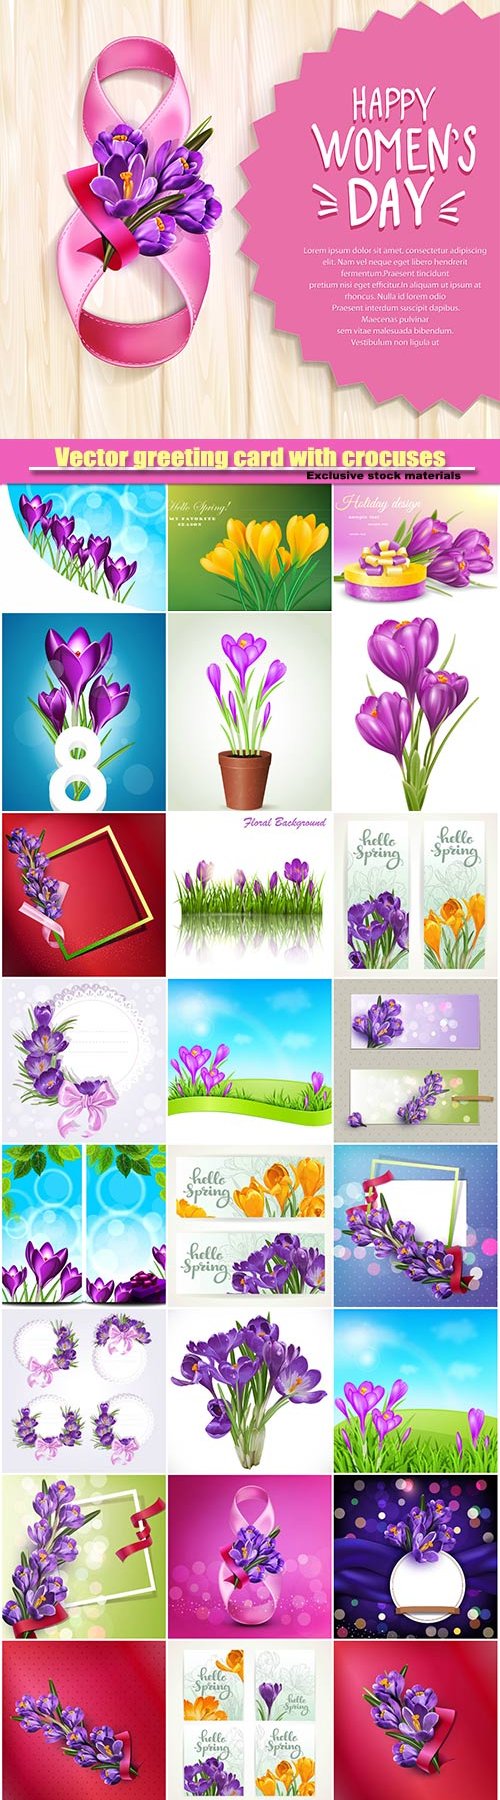 Vector greeting card with crocuses, frame with spring flowers